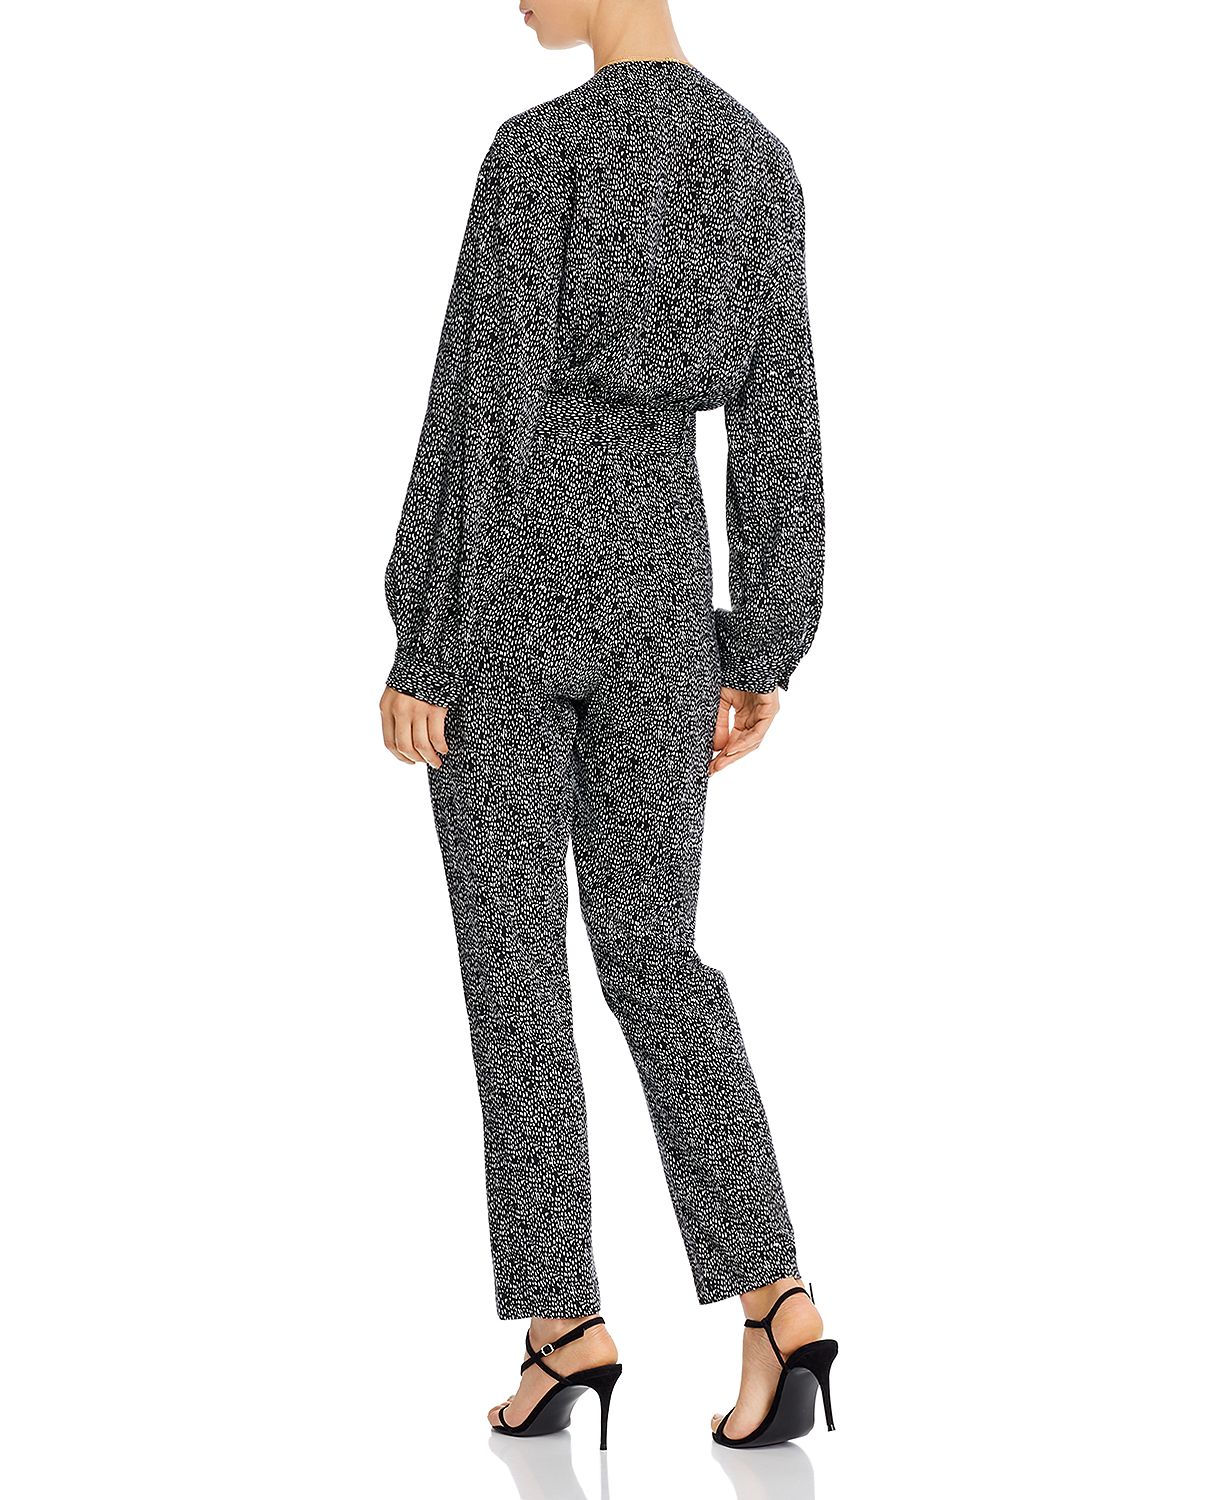 woocommerce-673321-2209615.cloudwaysapps.com-aqua-womens-black-white-belted-crossover-jumpsuit